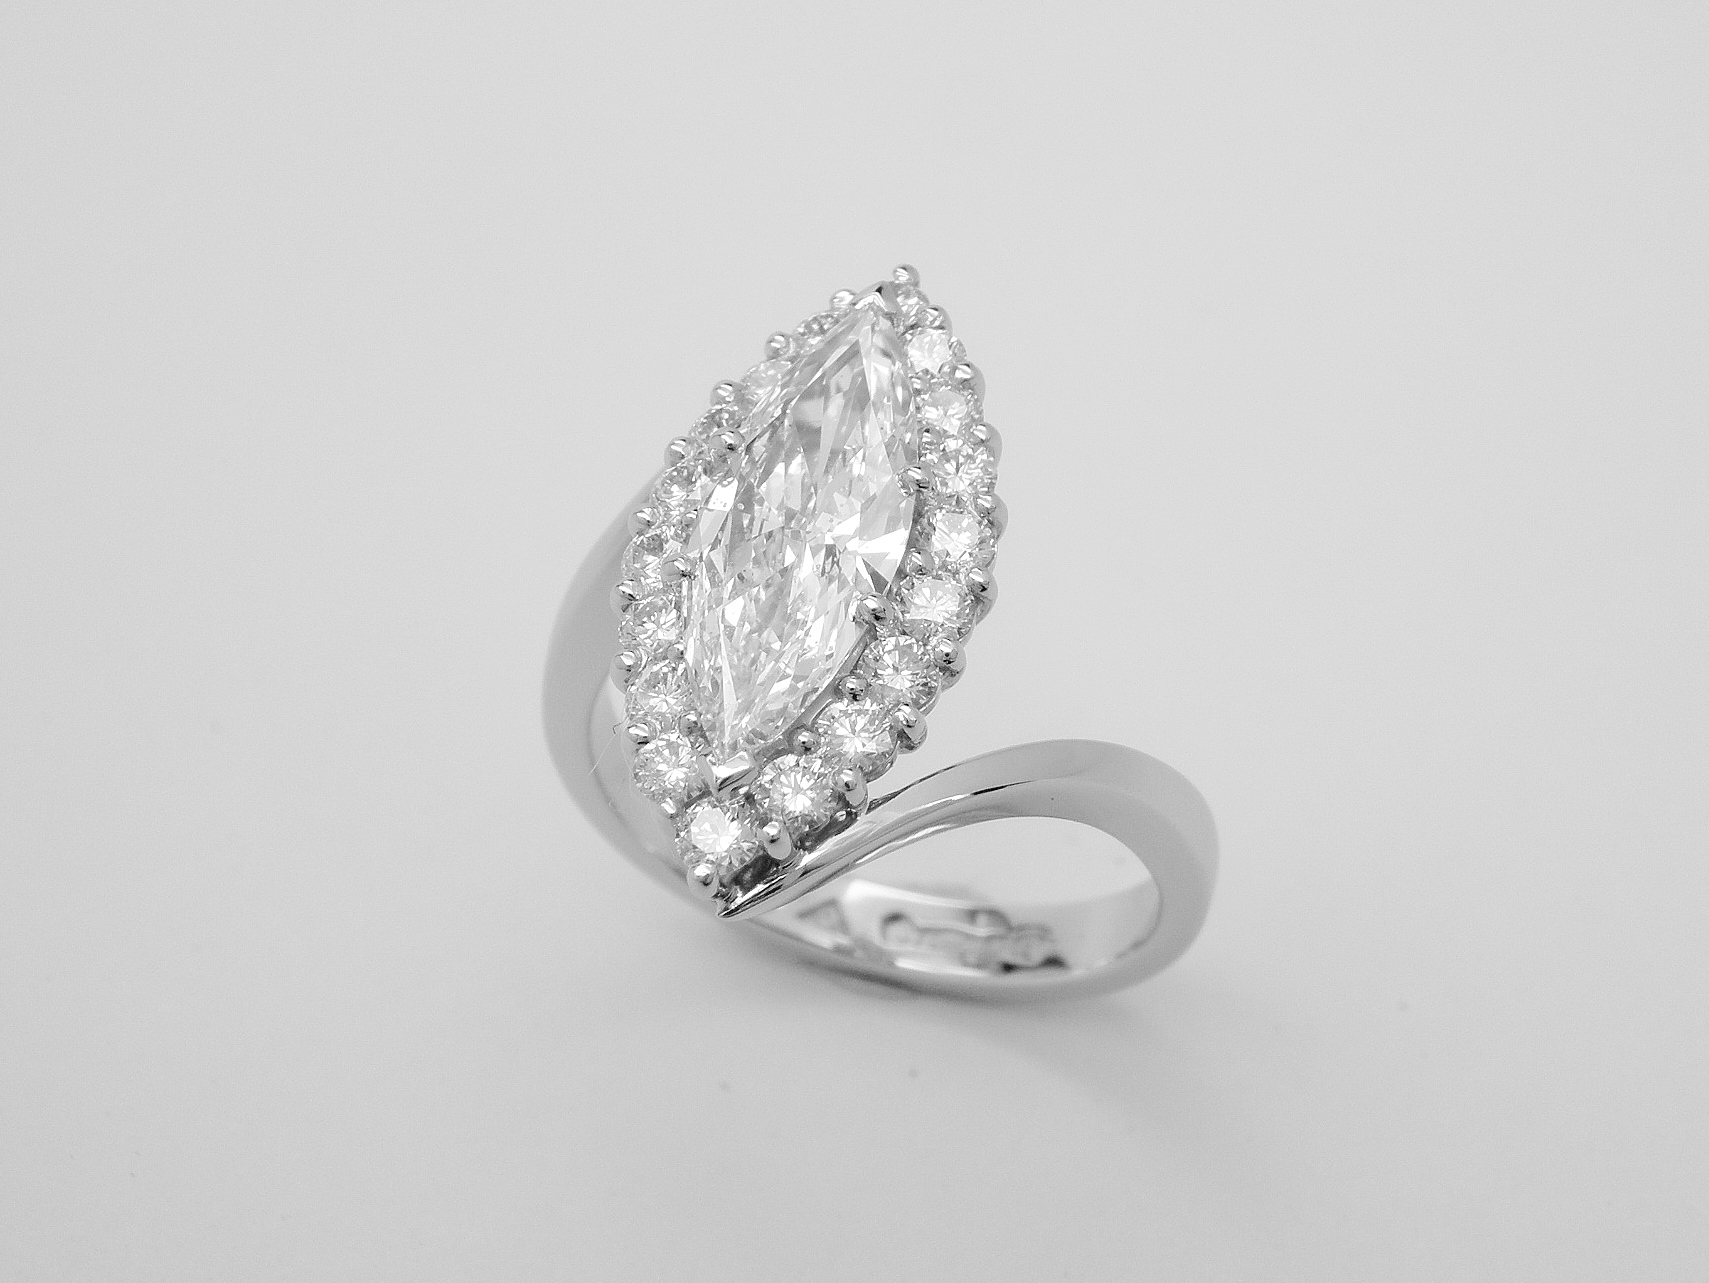 A marquise diamond and round brilliant cut diamond cross-over style ring mounted in platinum.